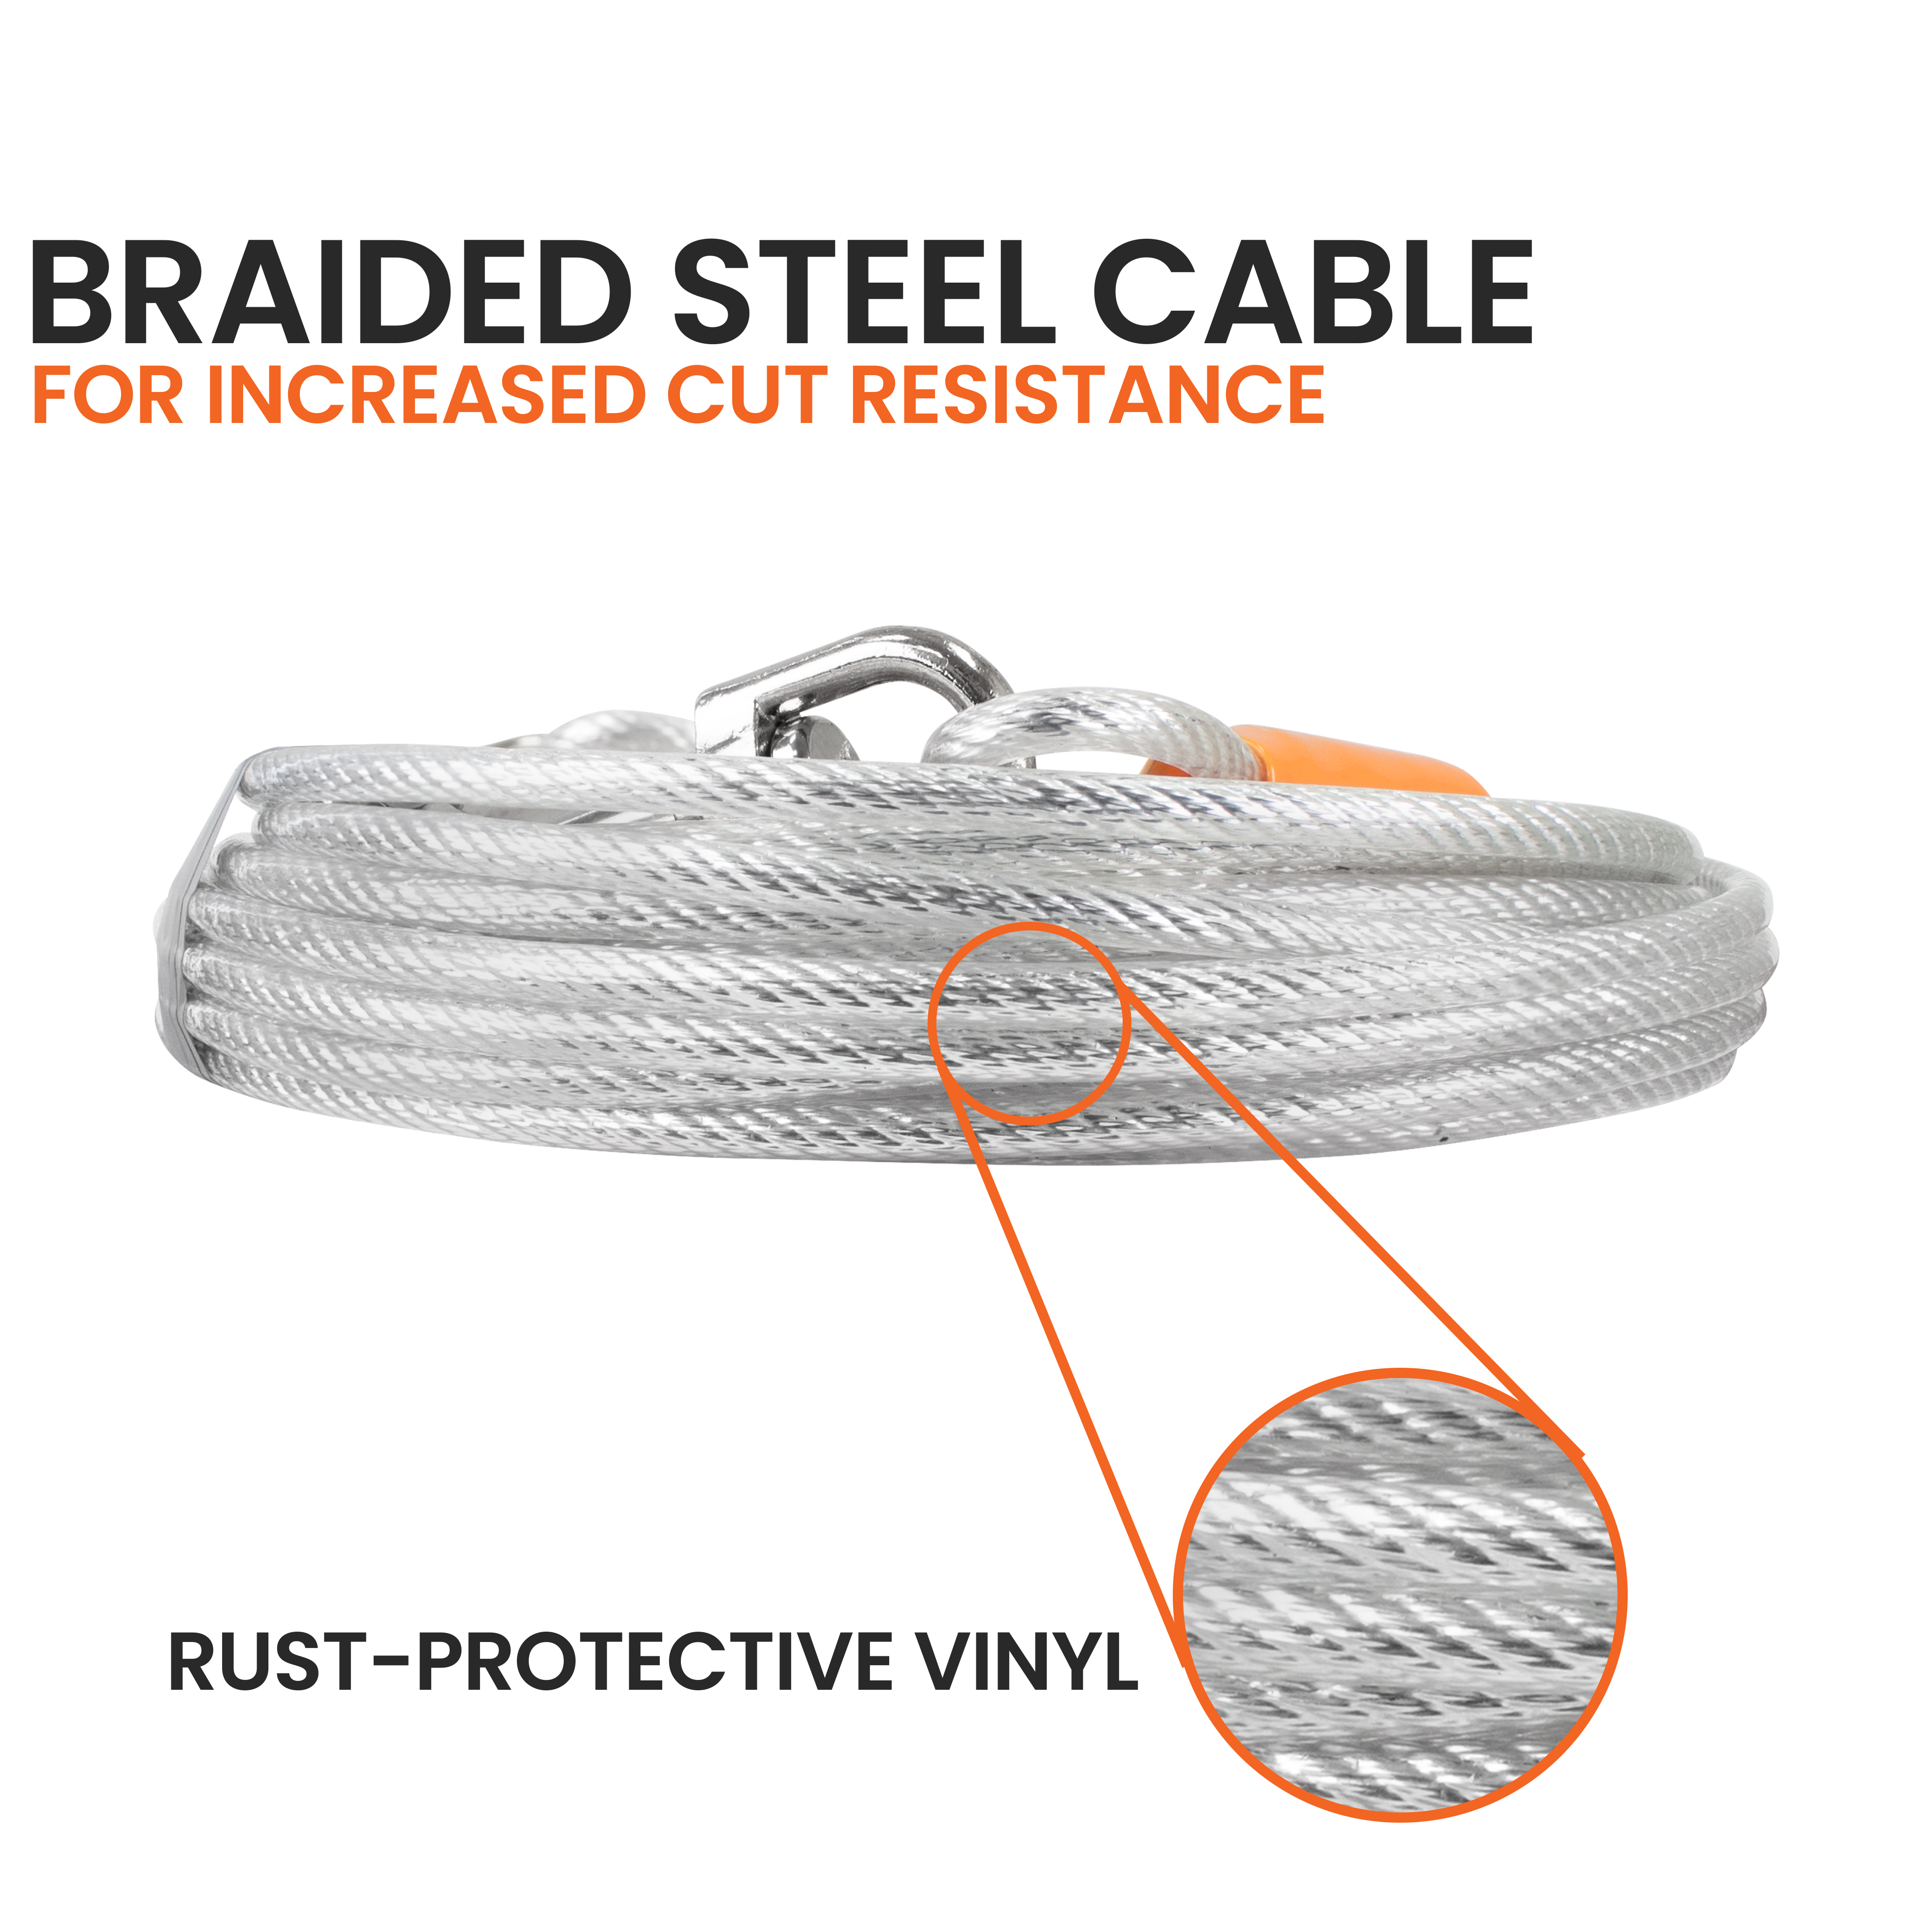 Braided Steel Cable for Increased Cut Resistance